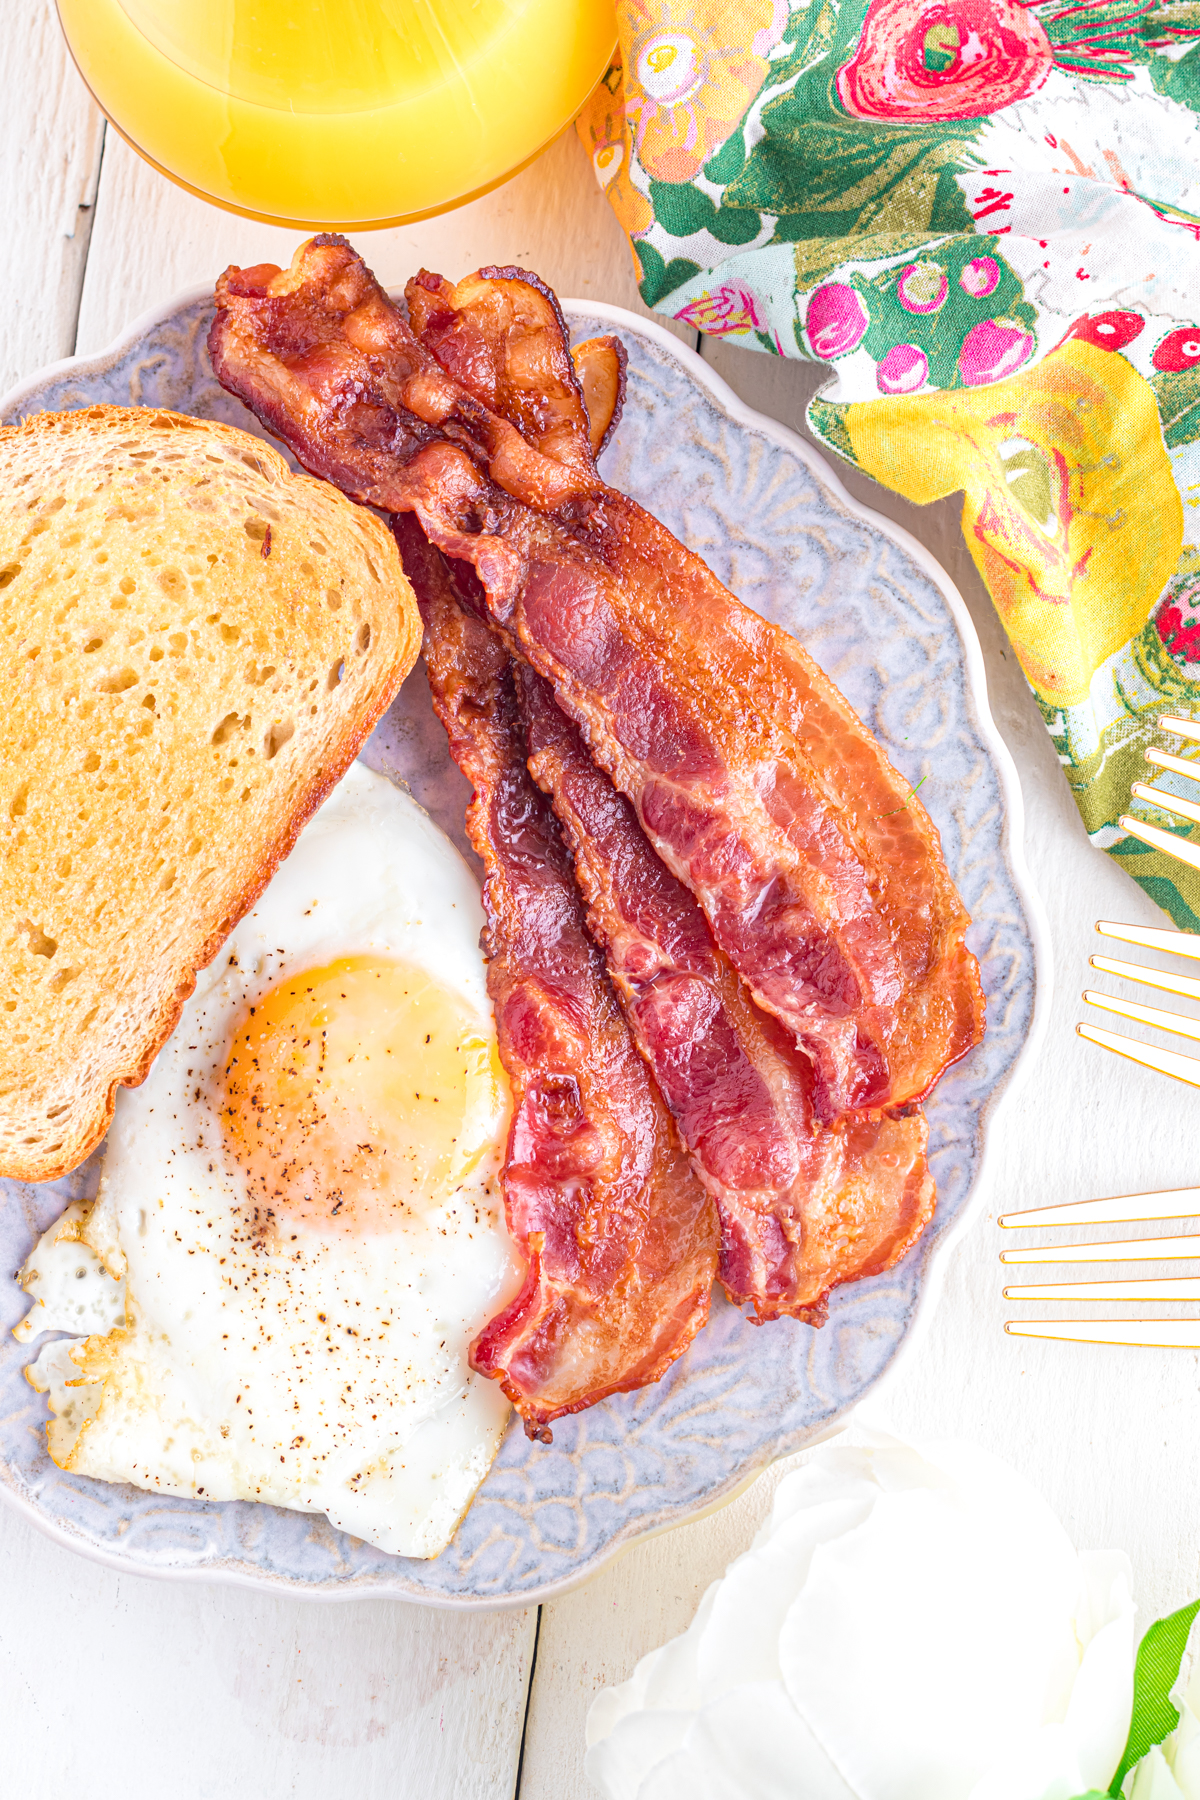 Bacon eggs and toast on plate.